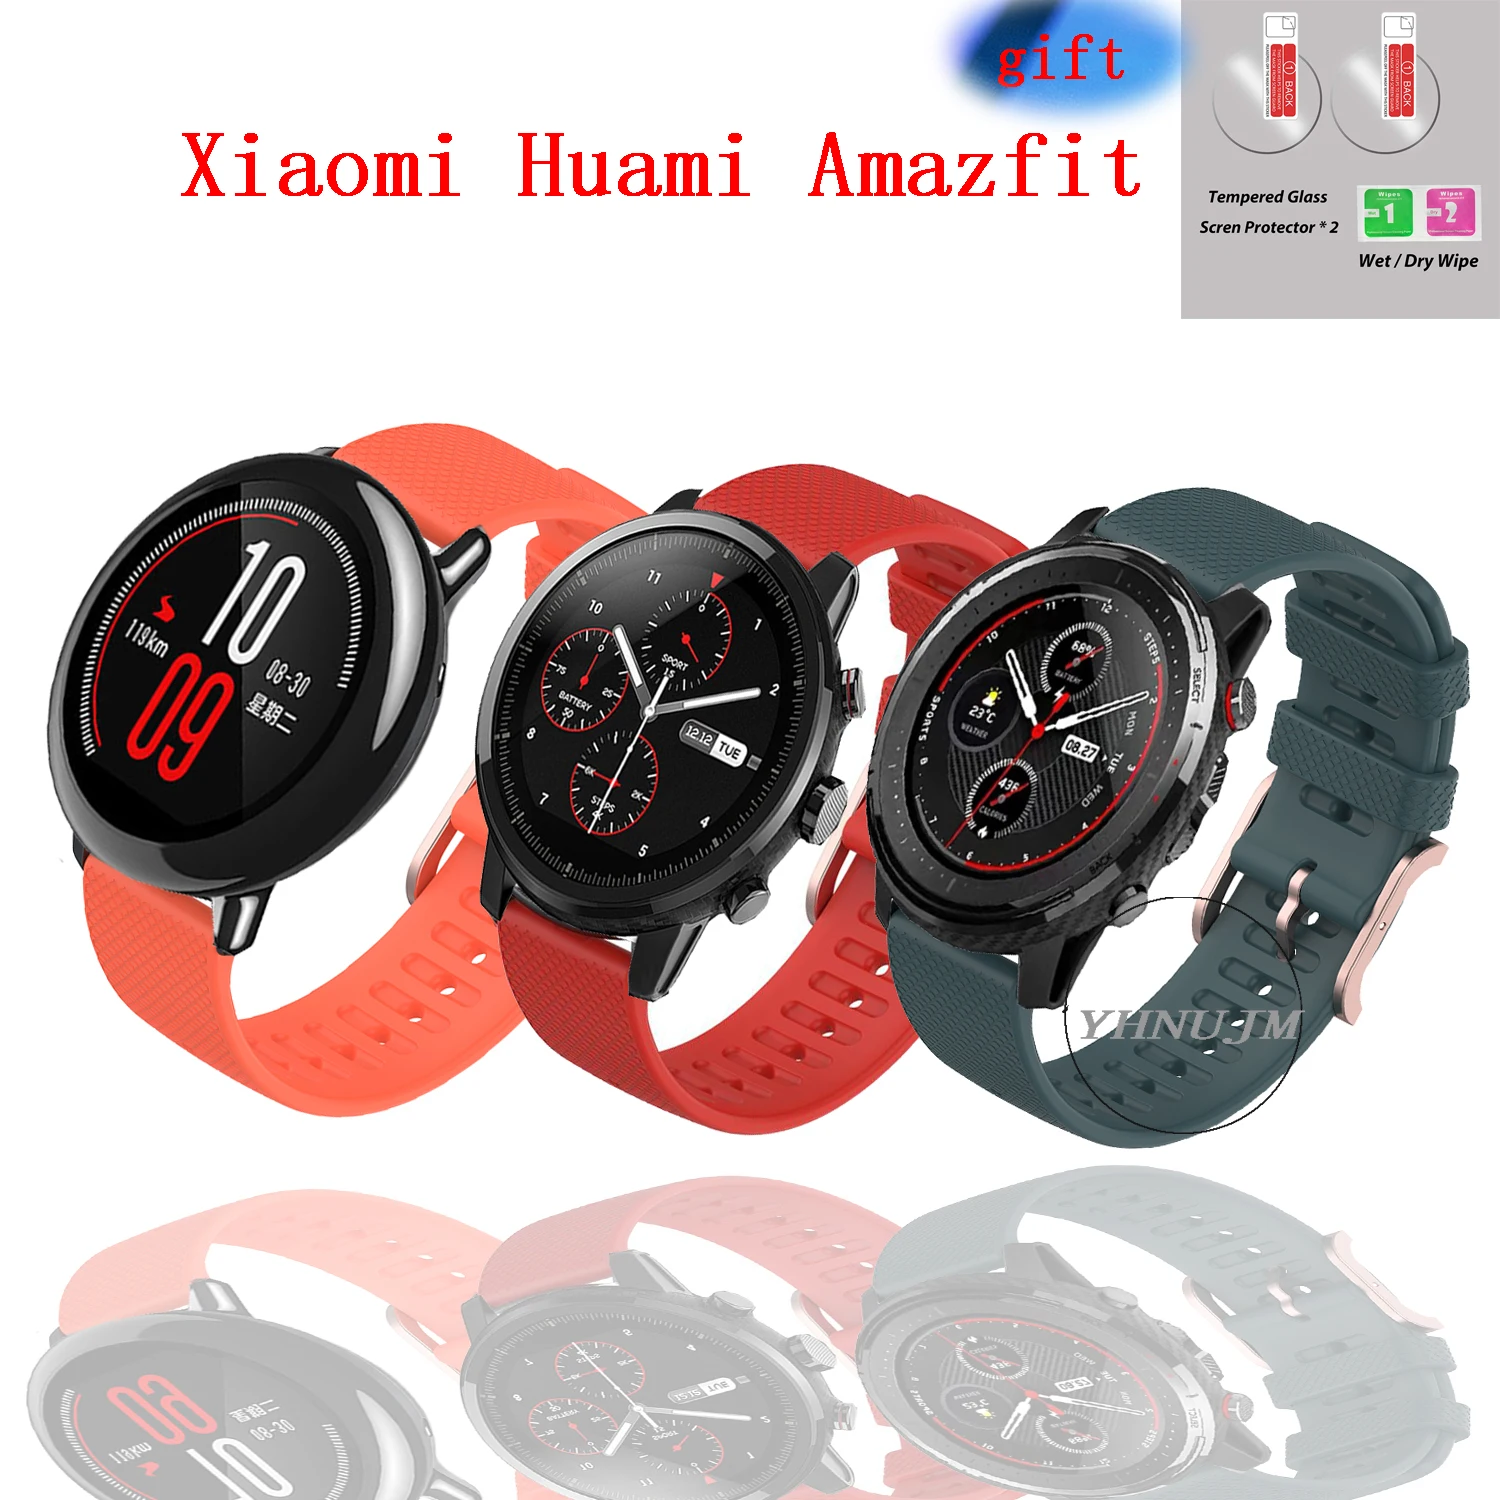 22mm Sports Silicone Wrist Strap bands for Xiaomi Huami Amazfit Bip BIT PACE Lite Youth Smart Watch Replacement Band Smartwatch color youth smart watch pc protective cover for huami amazfit bip bit frame shell smart watch for xiaomi huami amazfit bip bit